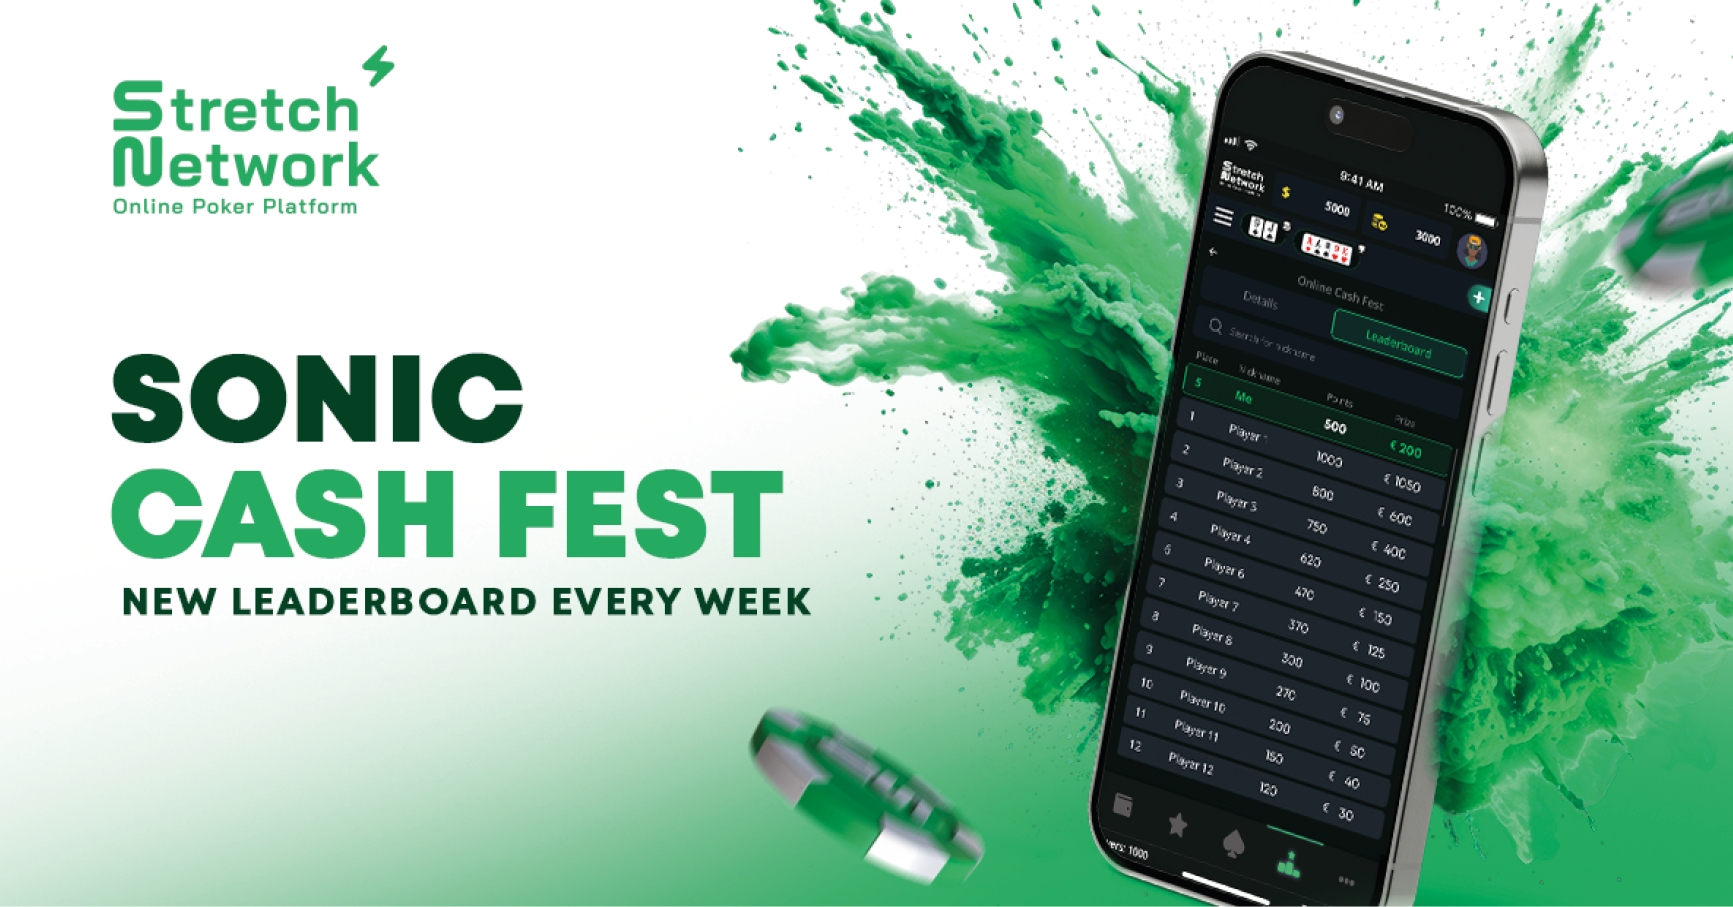 Stretch Network’s new Sonic Cash Fest